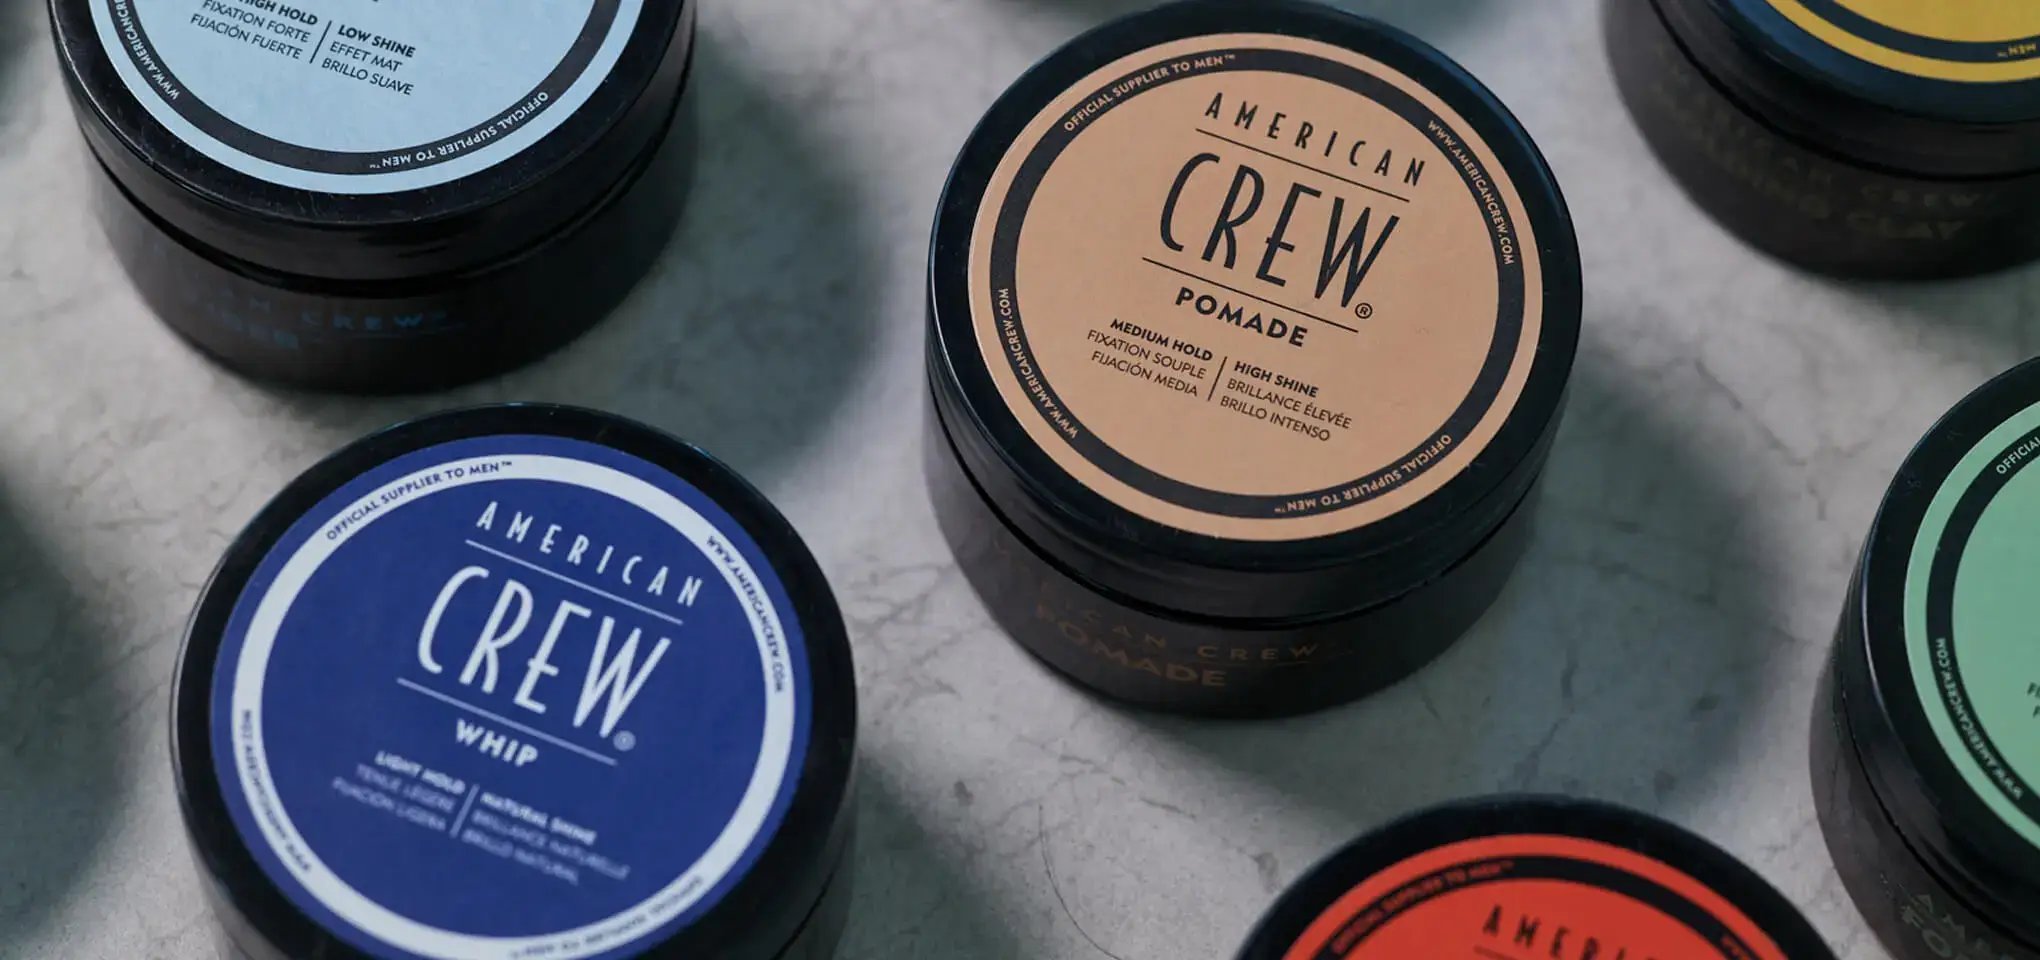 Men's Hairstyling & Grooming Products from American Crew